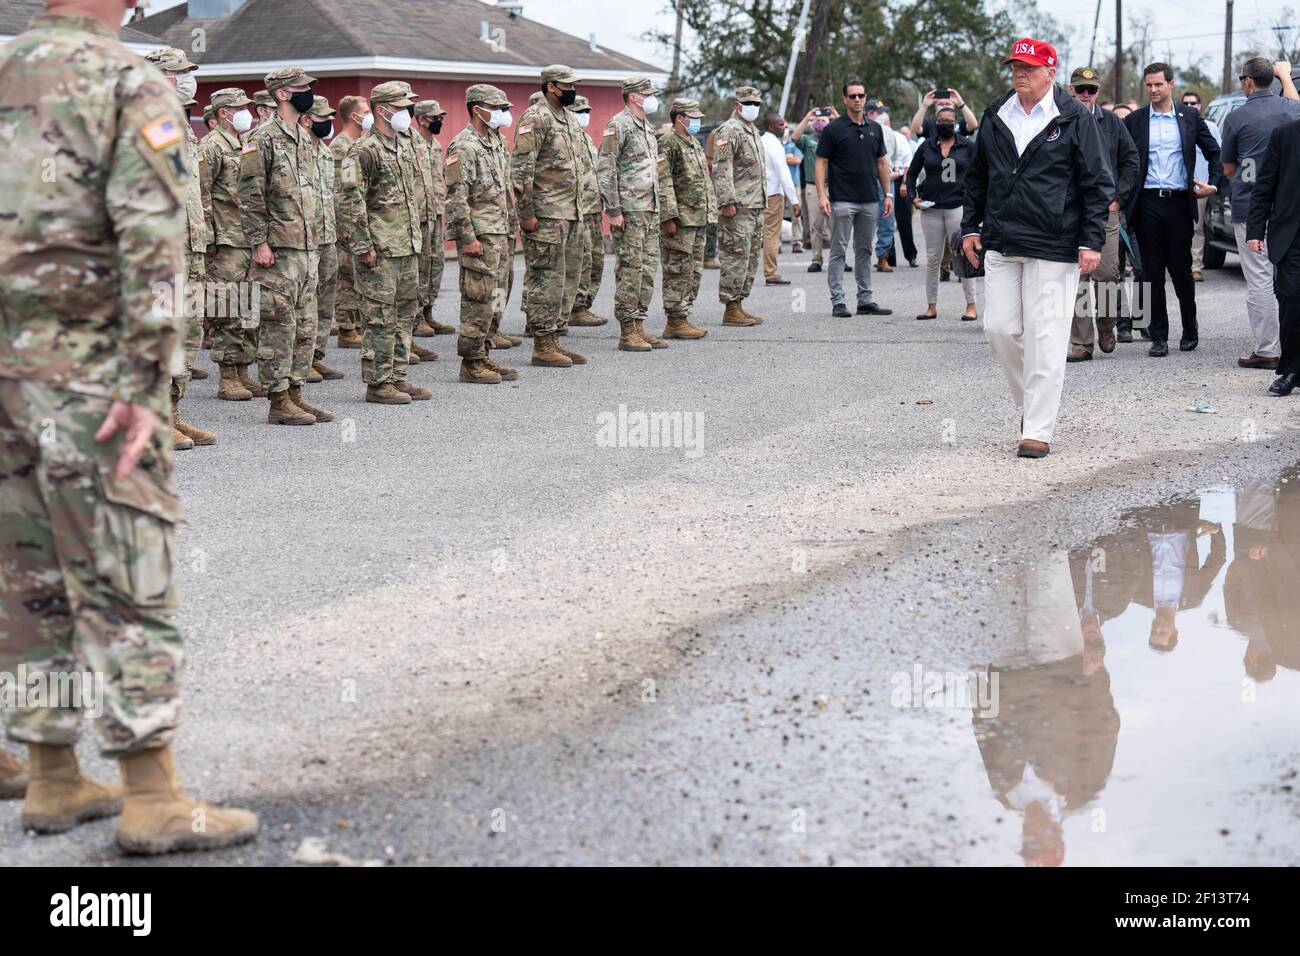 President Donald Trump visits approximately 200 National Guard troops Saturday Aug 29 2020 at Cougar Stadium in Lake Charles La. during his visit to view damage caused by Hurricane Laura. Stock Photo